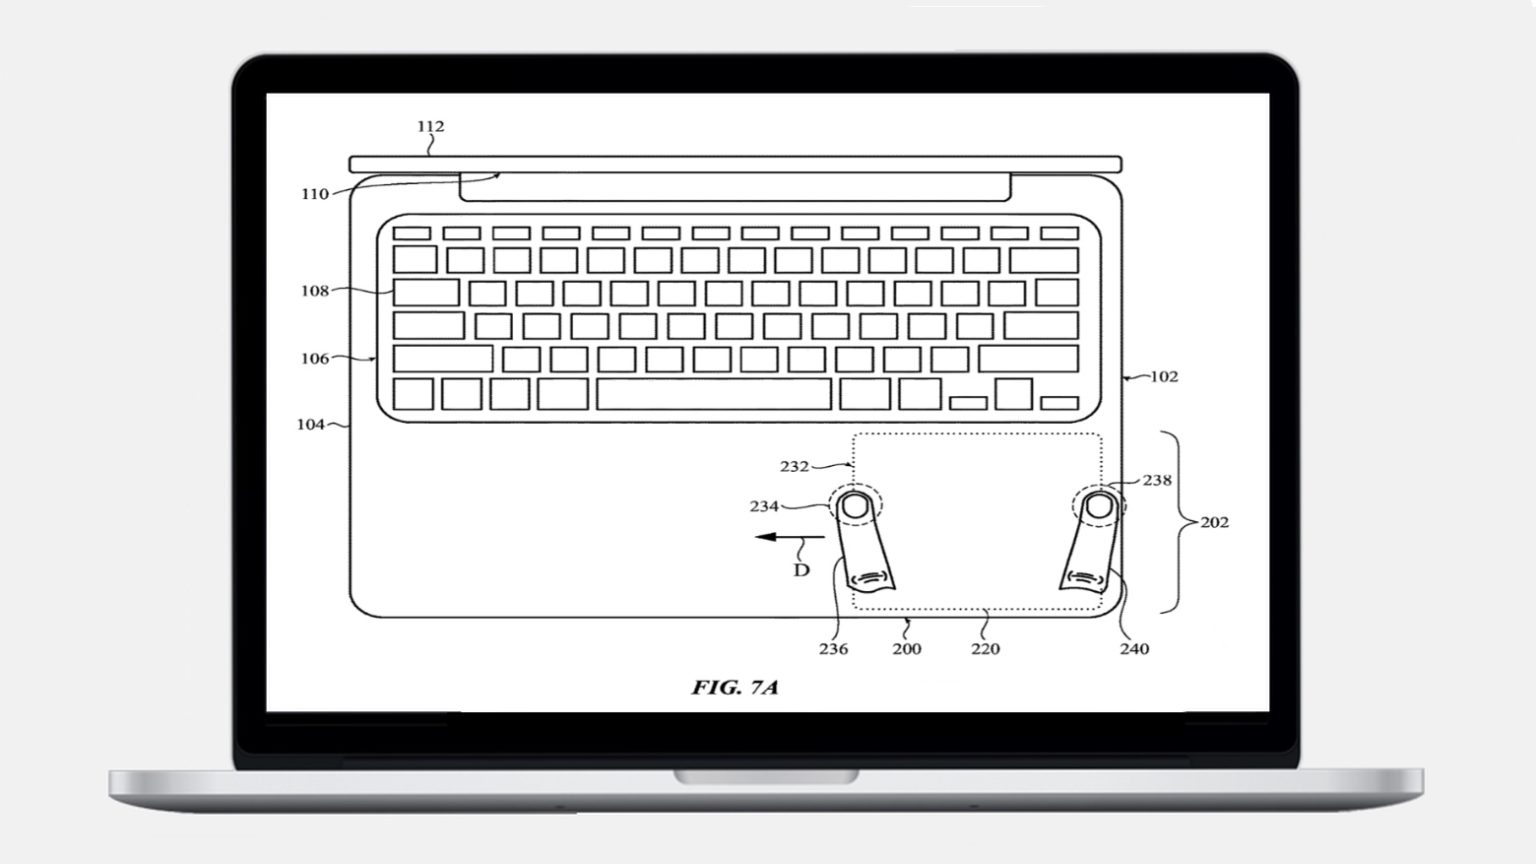 A touch sensitive area could make a MacBook trackpad movable.